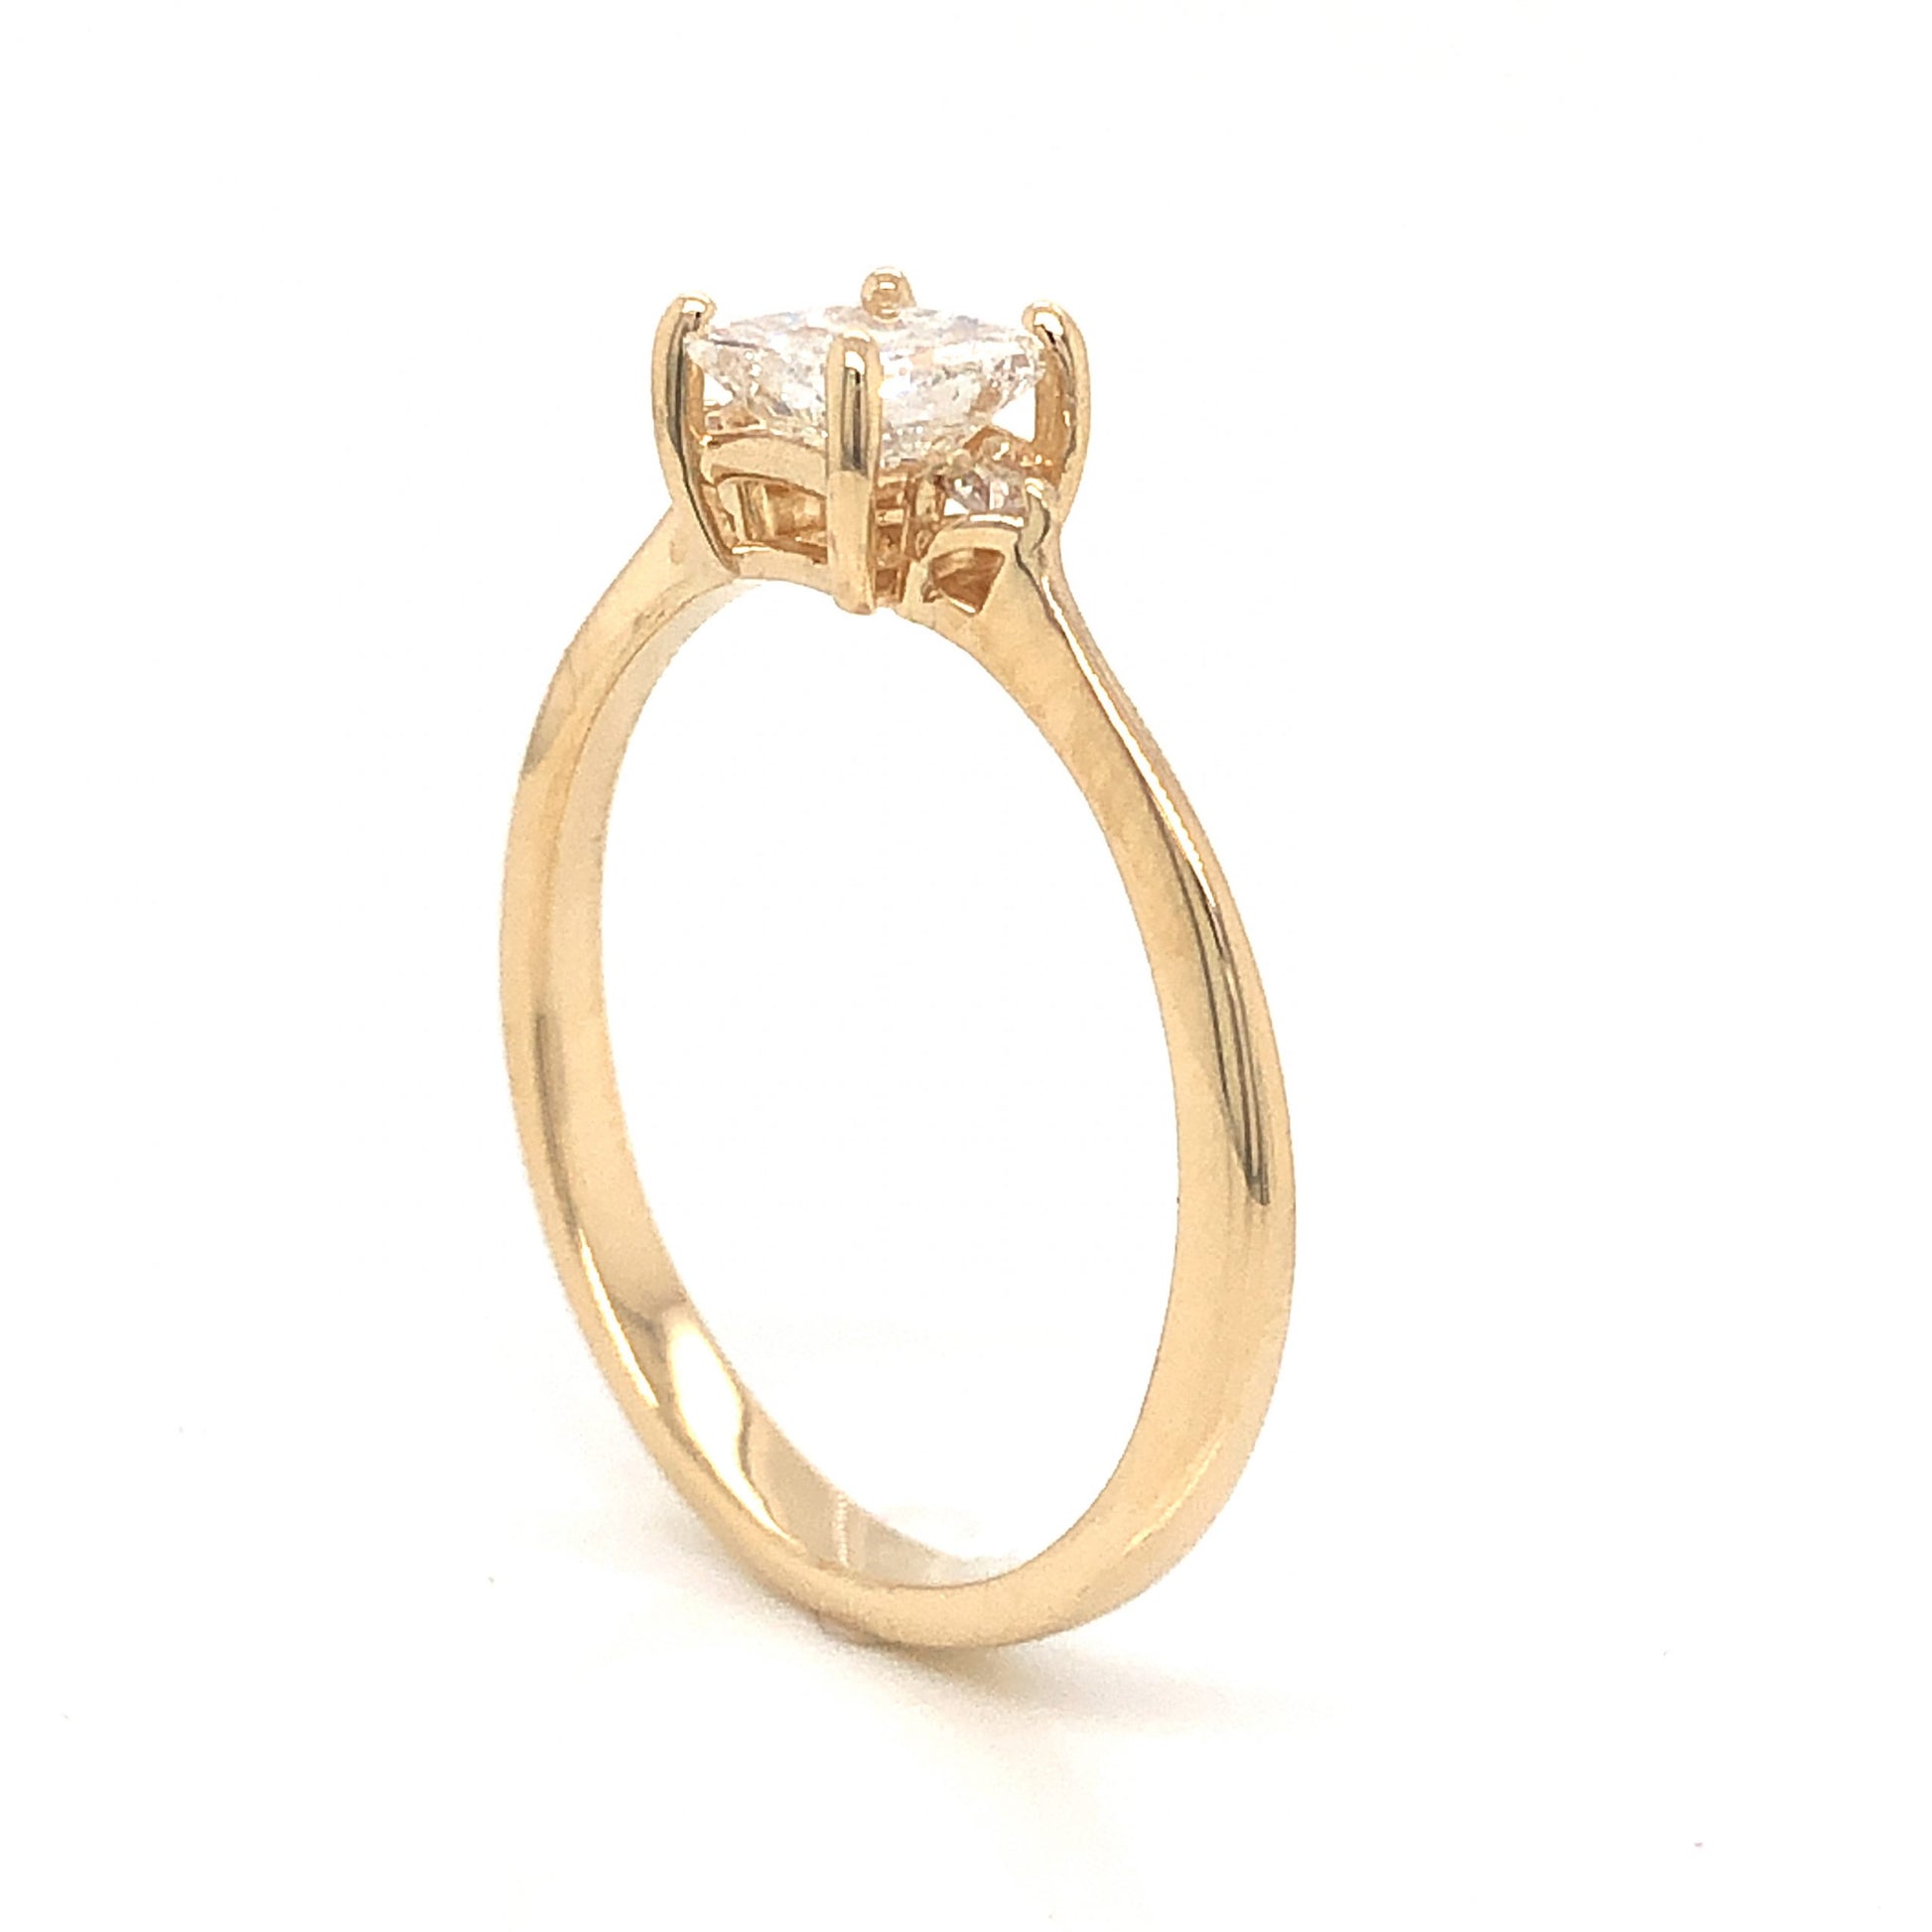 .58 Princess Cut Diamond Engagement Ring in 14K Yellow GoldComposition: 14 Karat Yellow Gold Ring Size: 7 Total Diamond Weight: .64ct Total Gram Weight: 2.2 g Inscription: 14k 
      